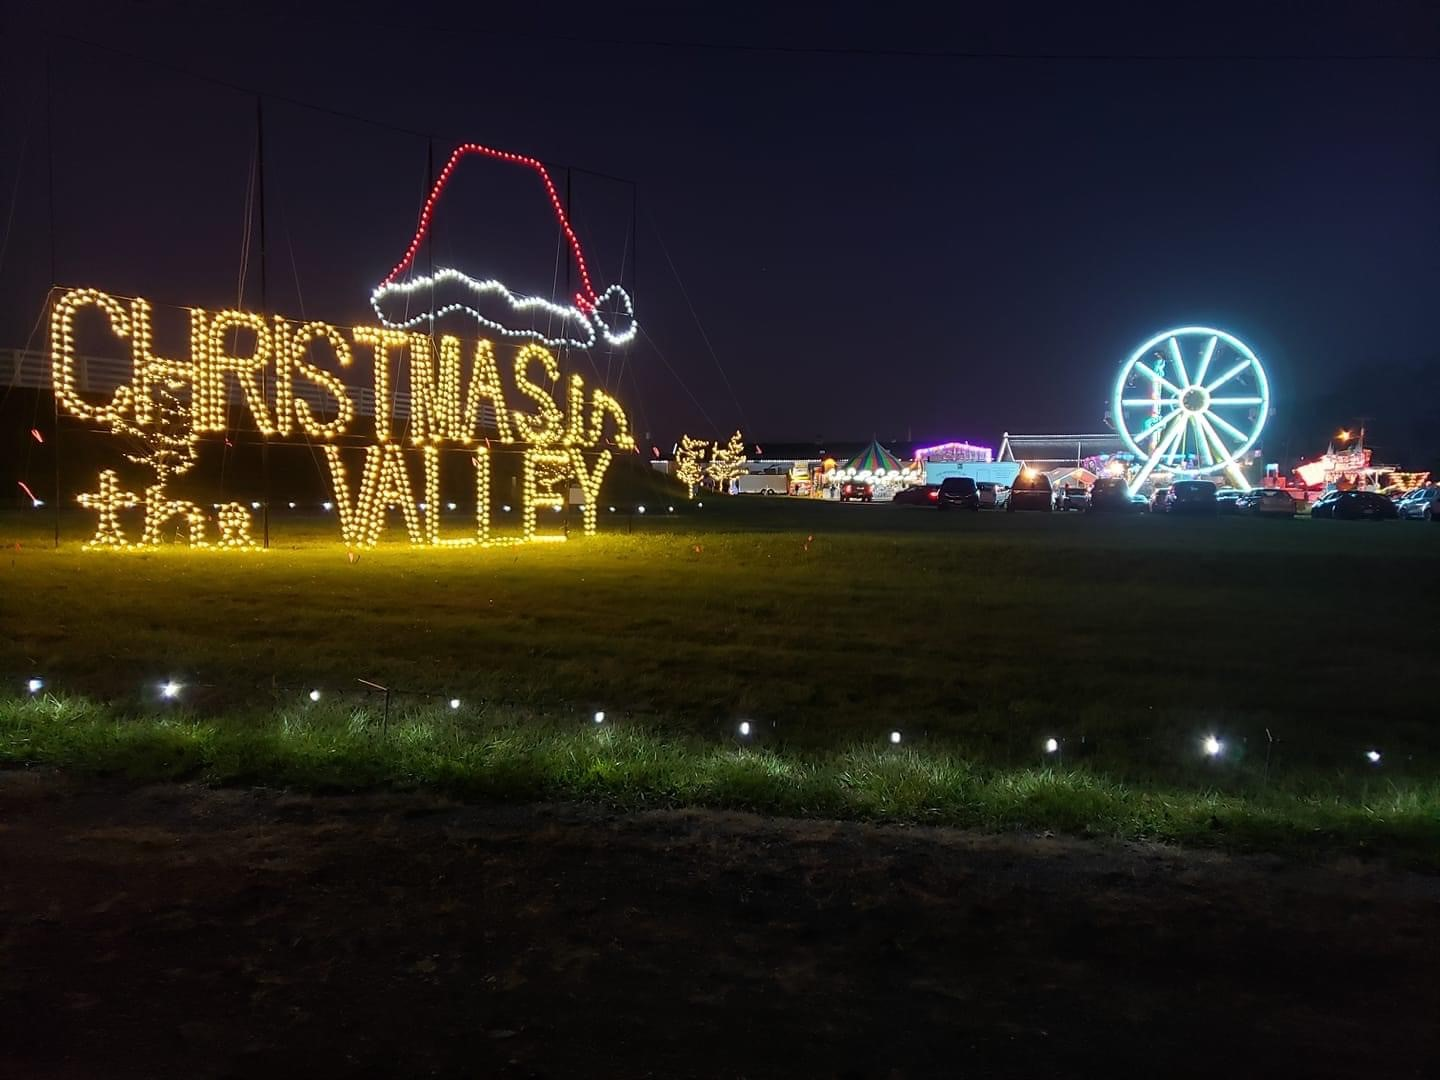 Lights And Sounds Of The Season From Around The Shenandoah Valley